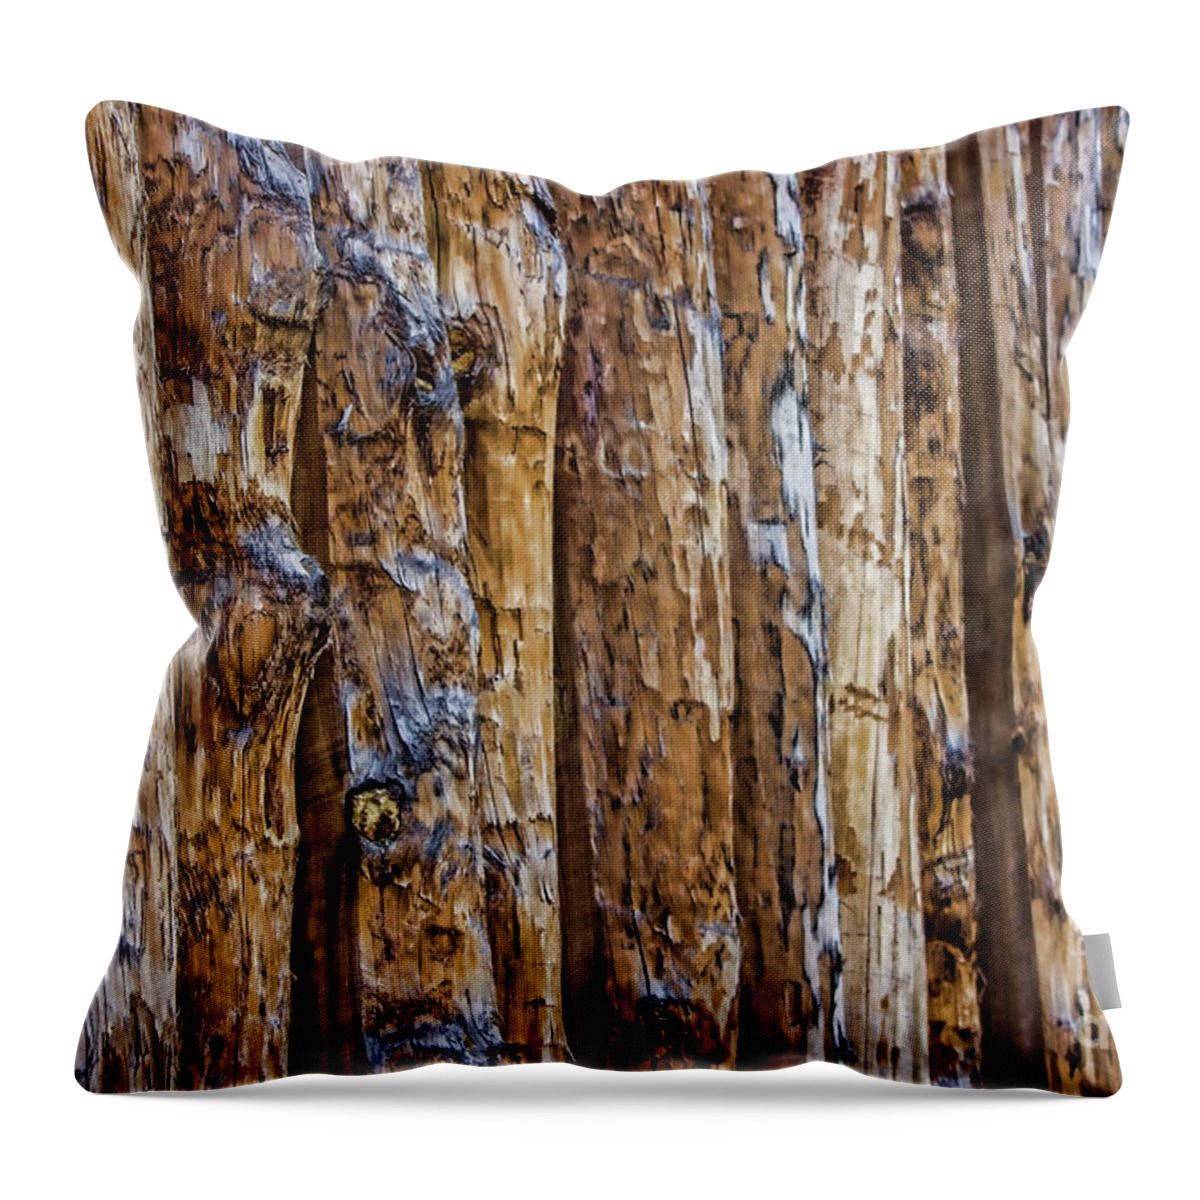 Posts Throw Pillow featuring the photograph Abstract Posts by Roberta Byram